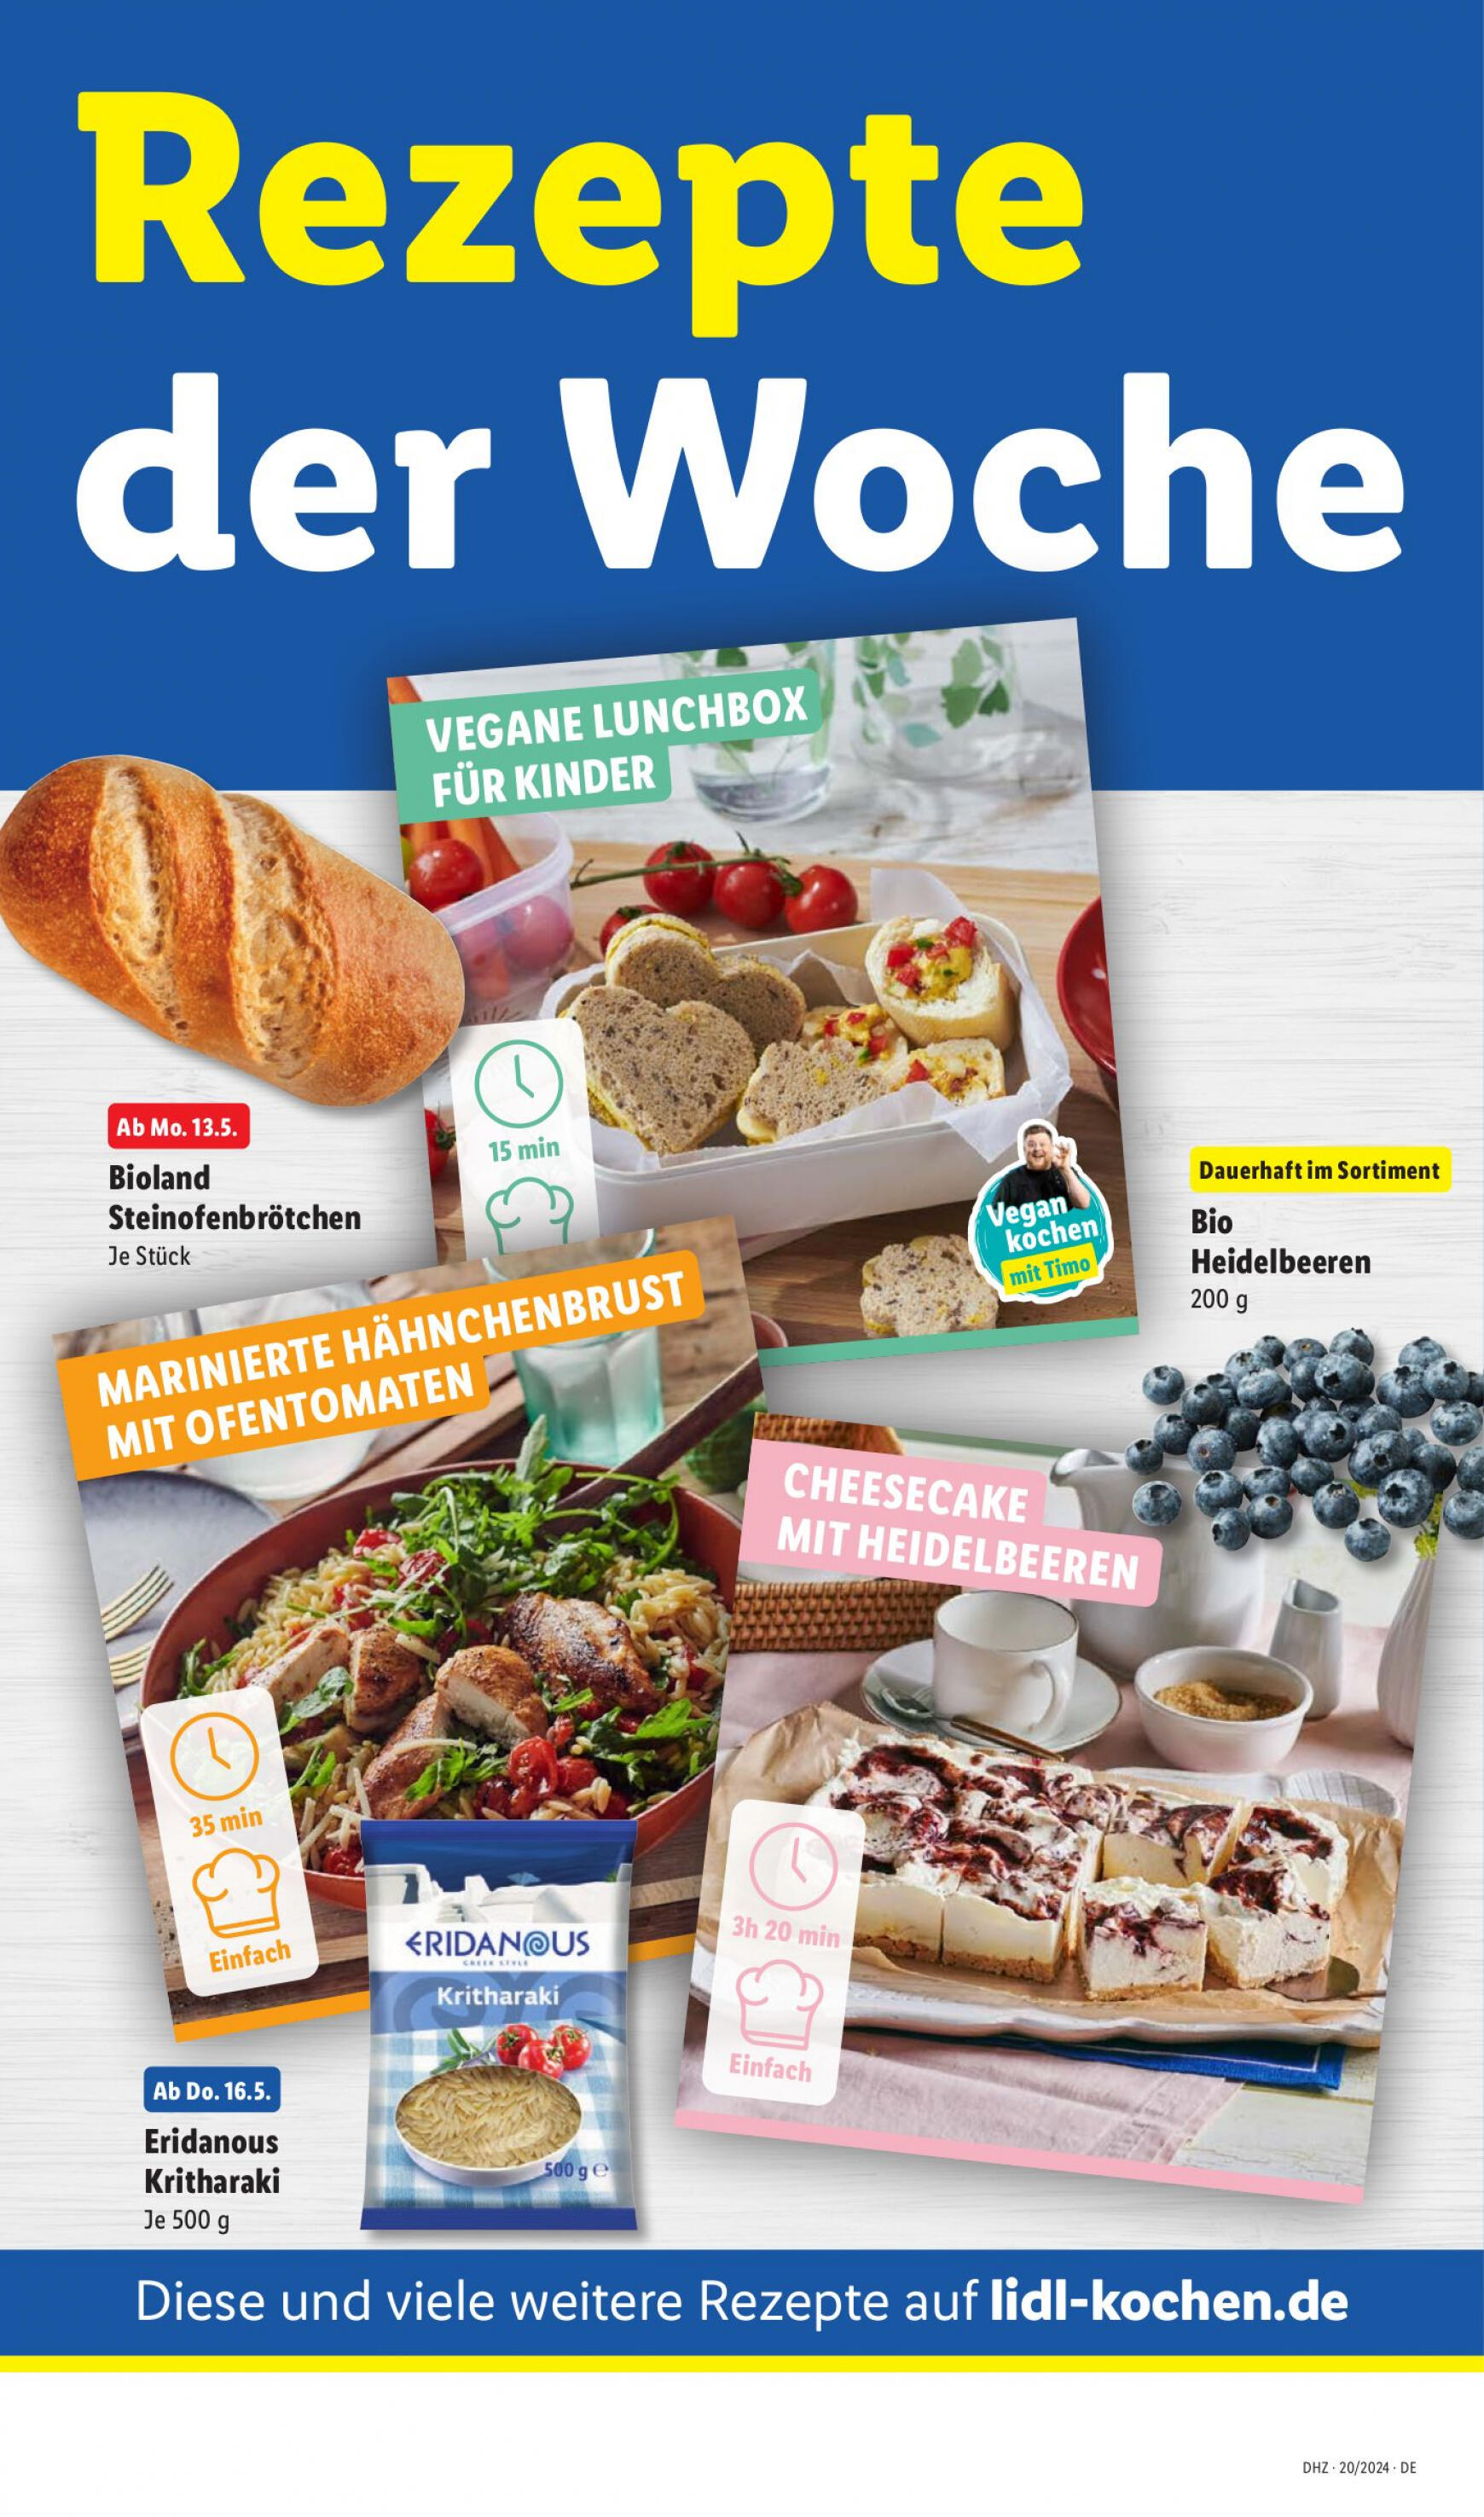 lidl - Flyer Lidl aktuell 13.05. - 18.05. - page: 7